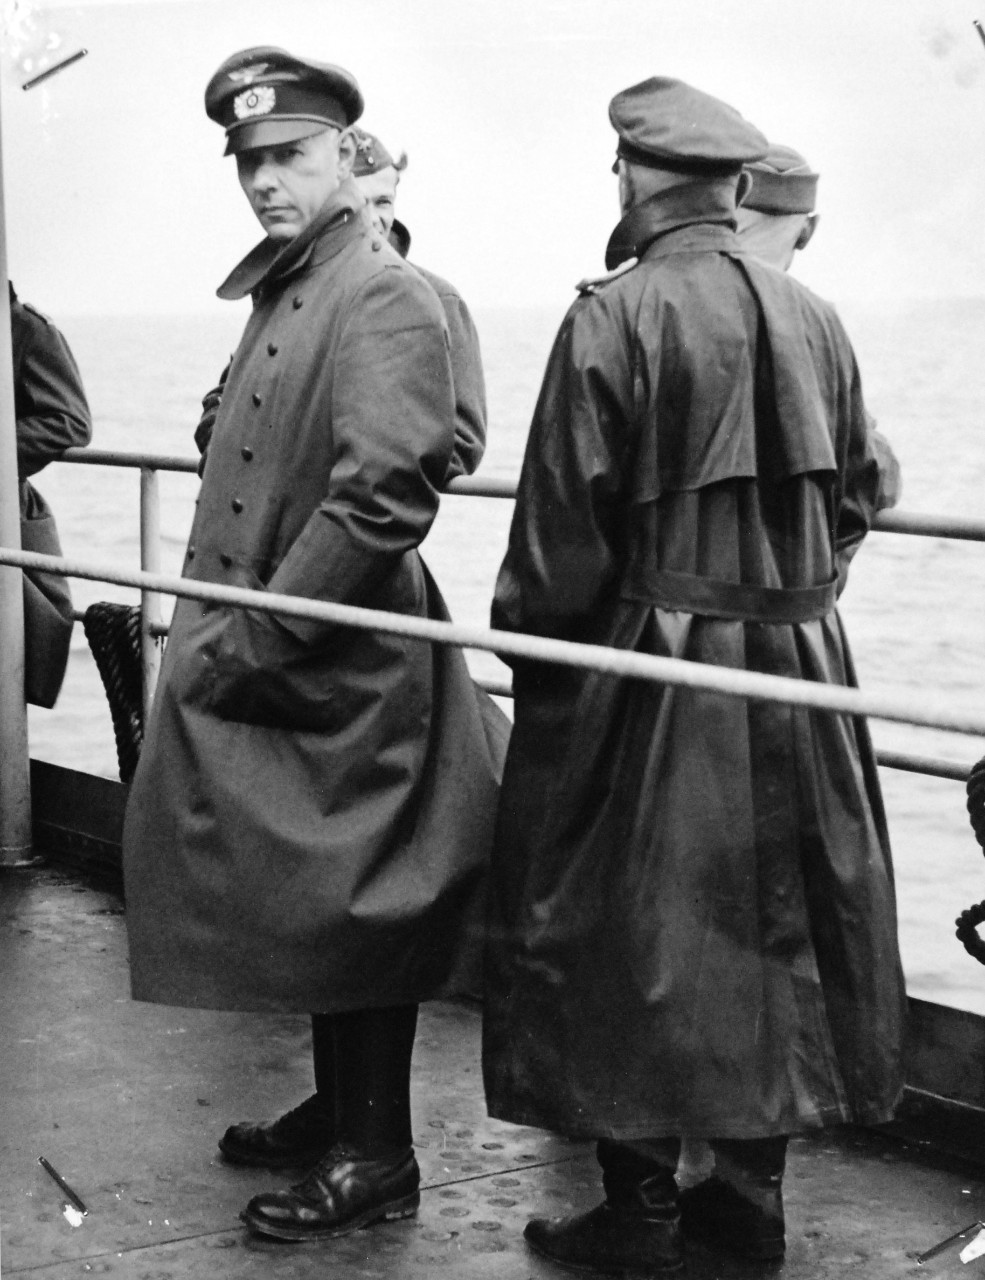 26-G-2576:  Normandy Invasion, German Prisoners,  June 1944.   German Officers aboard a Coast Guard Manned Transport.   There’s definitely nothing shabby about the clothing of these captured German officers as they “take the air” on a Coast Guard manned transport en route to the United States, June 1944.  Official U.S. Coast Guard Photograph, now in the collections of the National Archives.   (2015/5/19).  